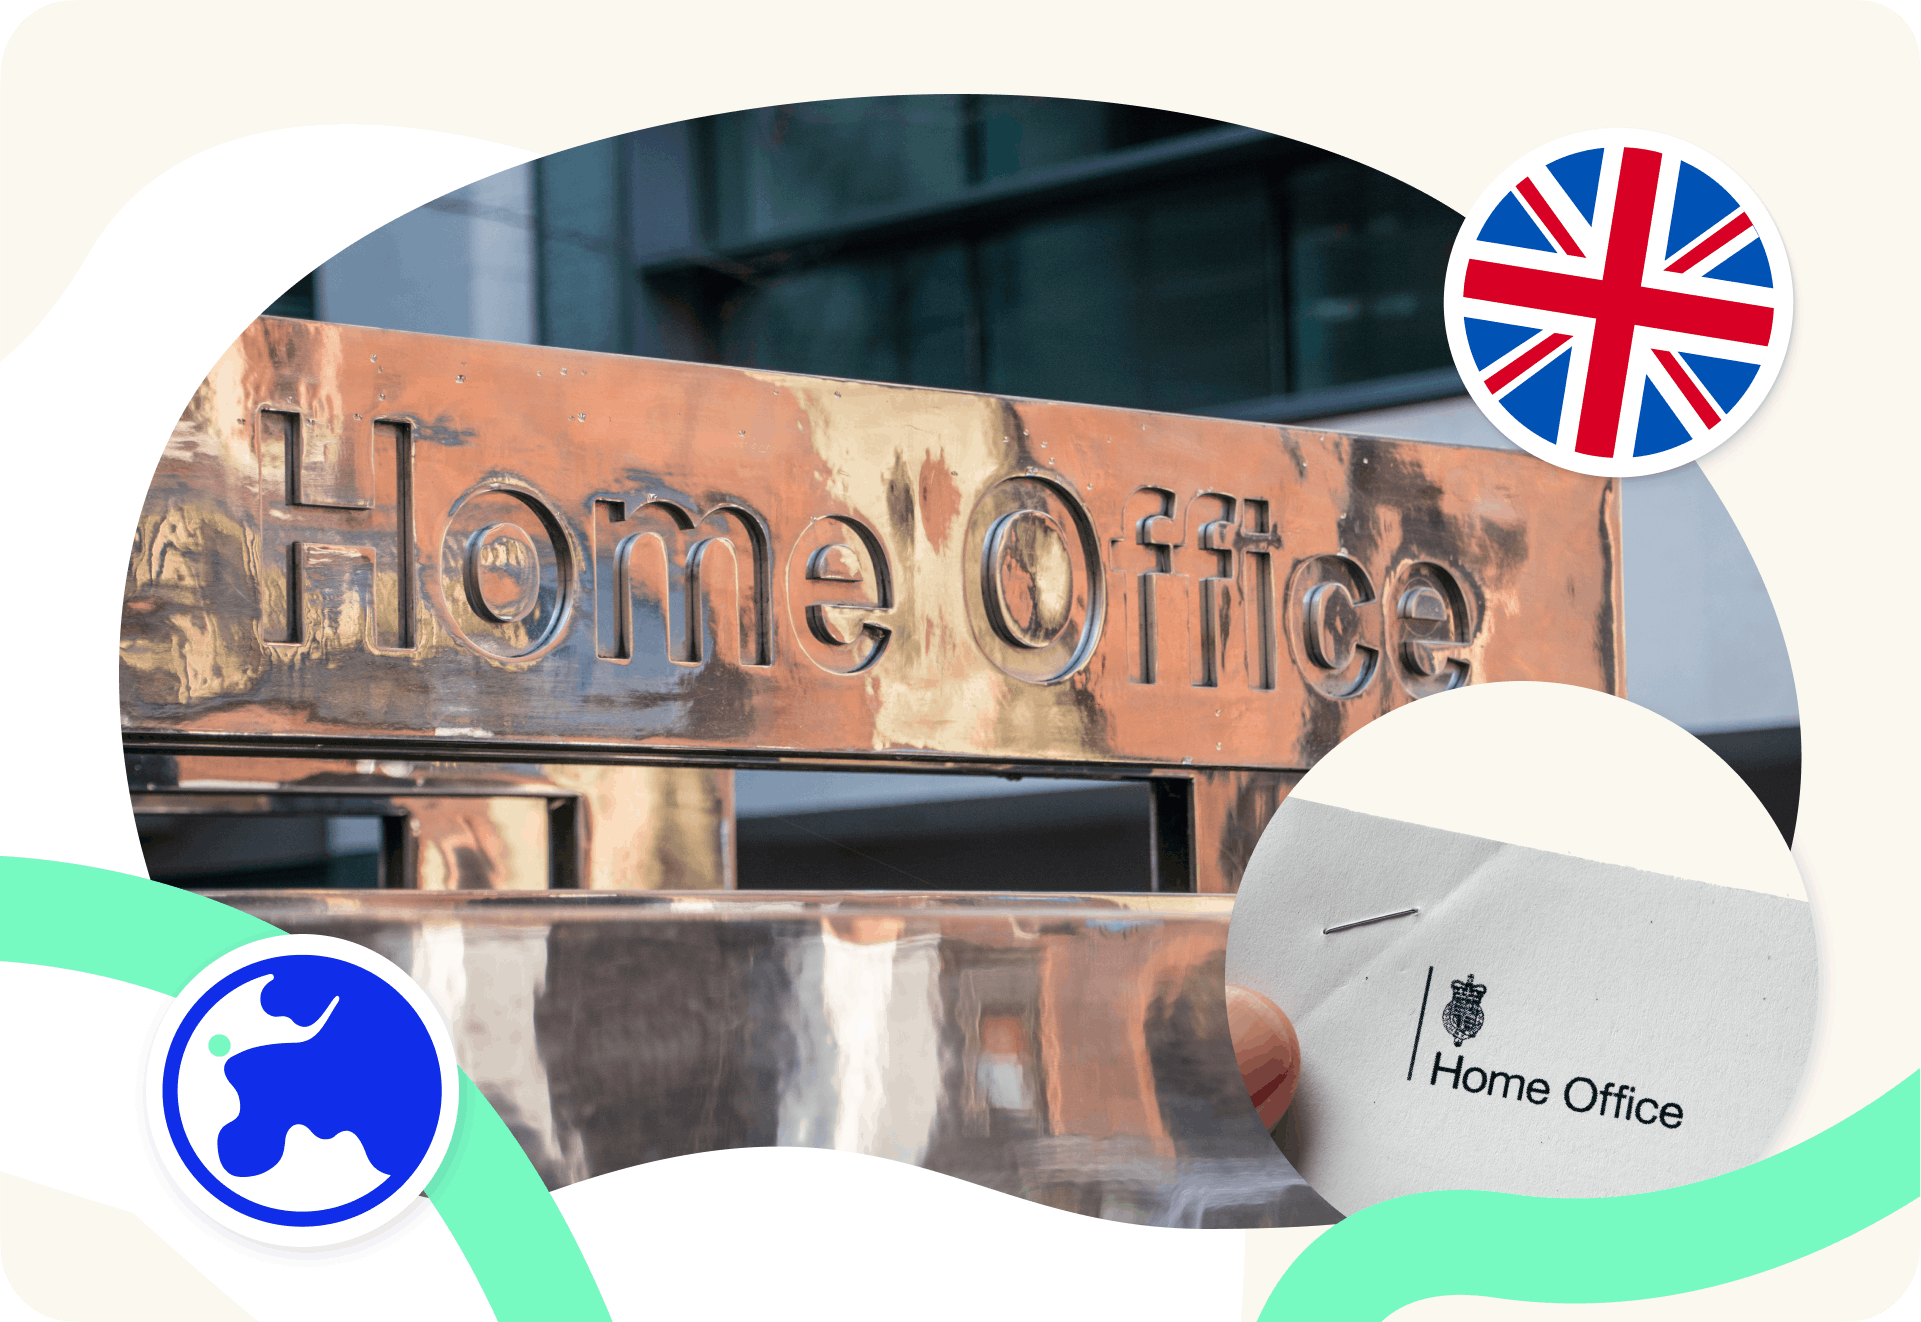 Home office changes UK visa prices